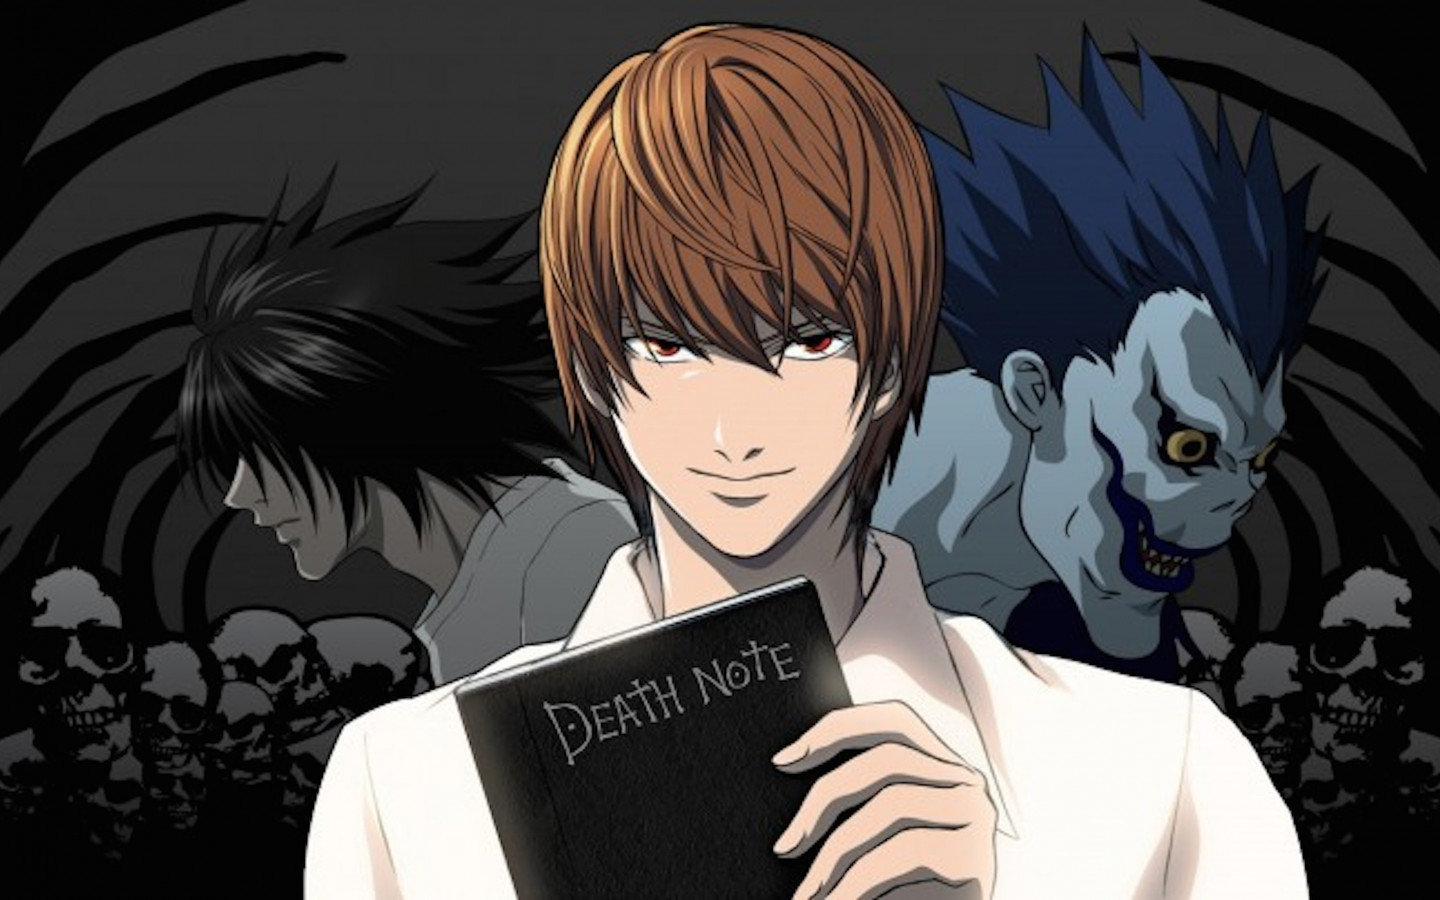 A man holding an open book with two other characters - Death Note